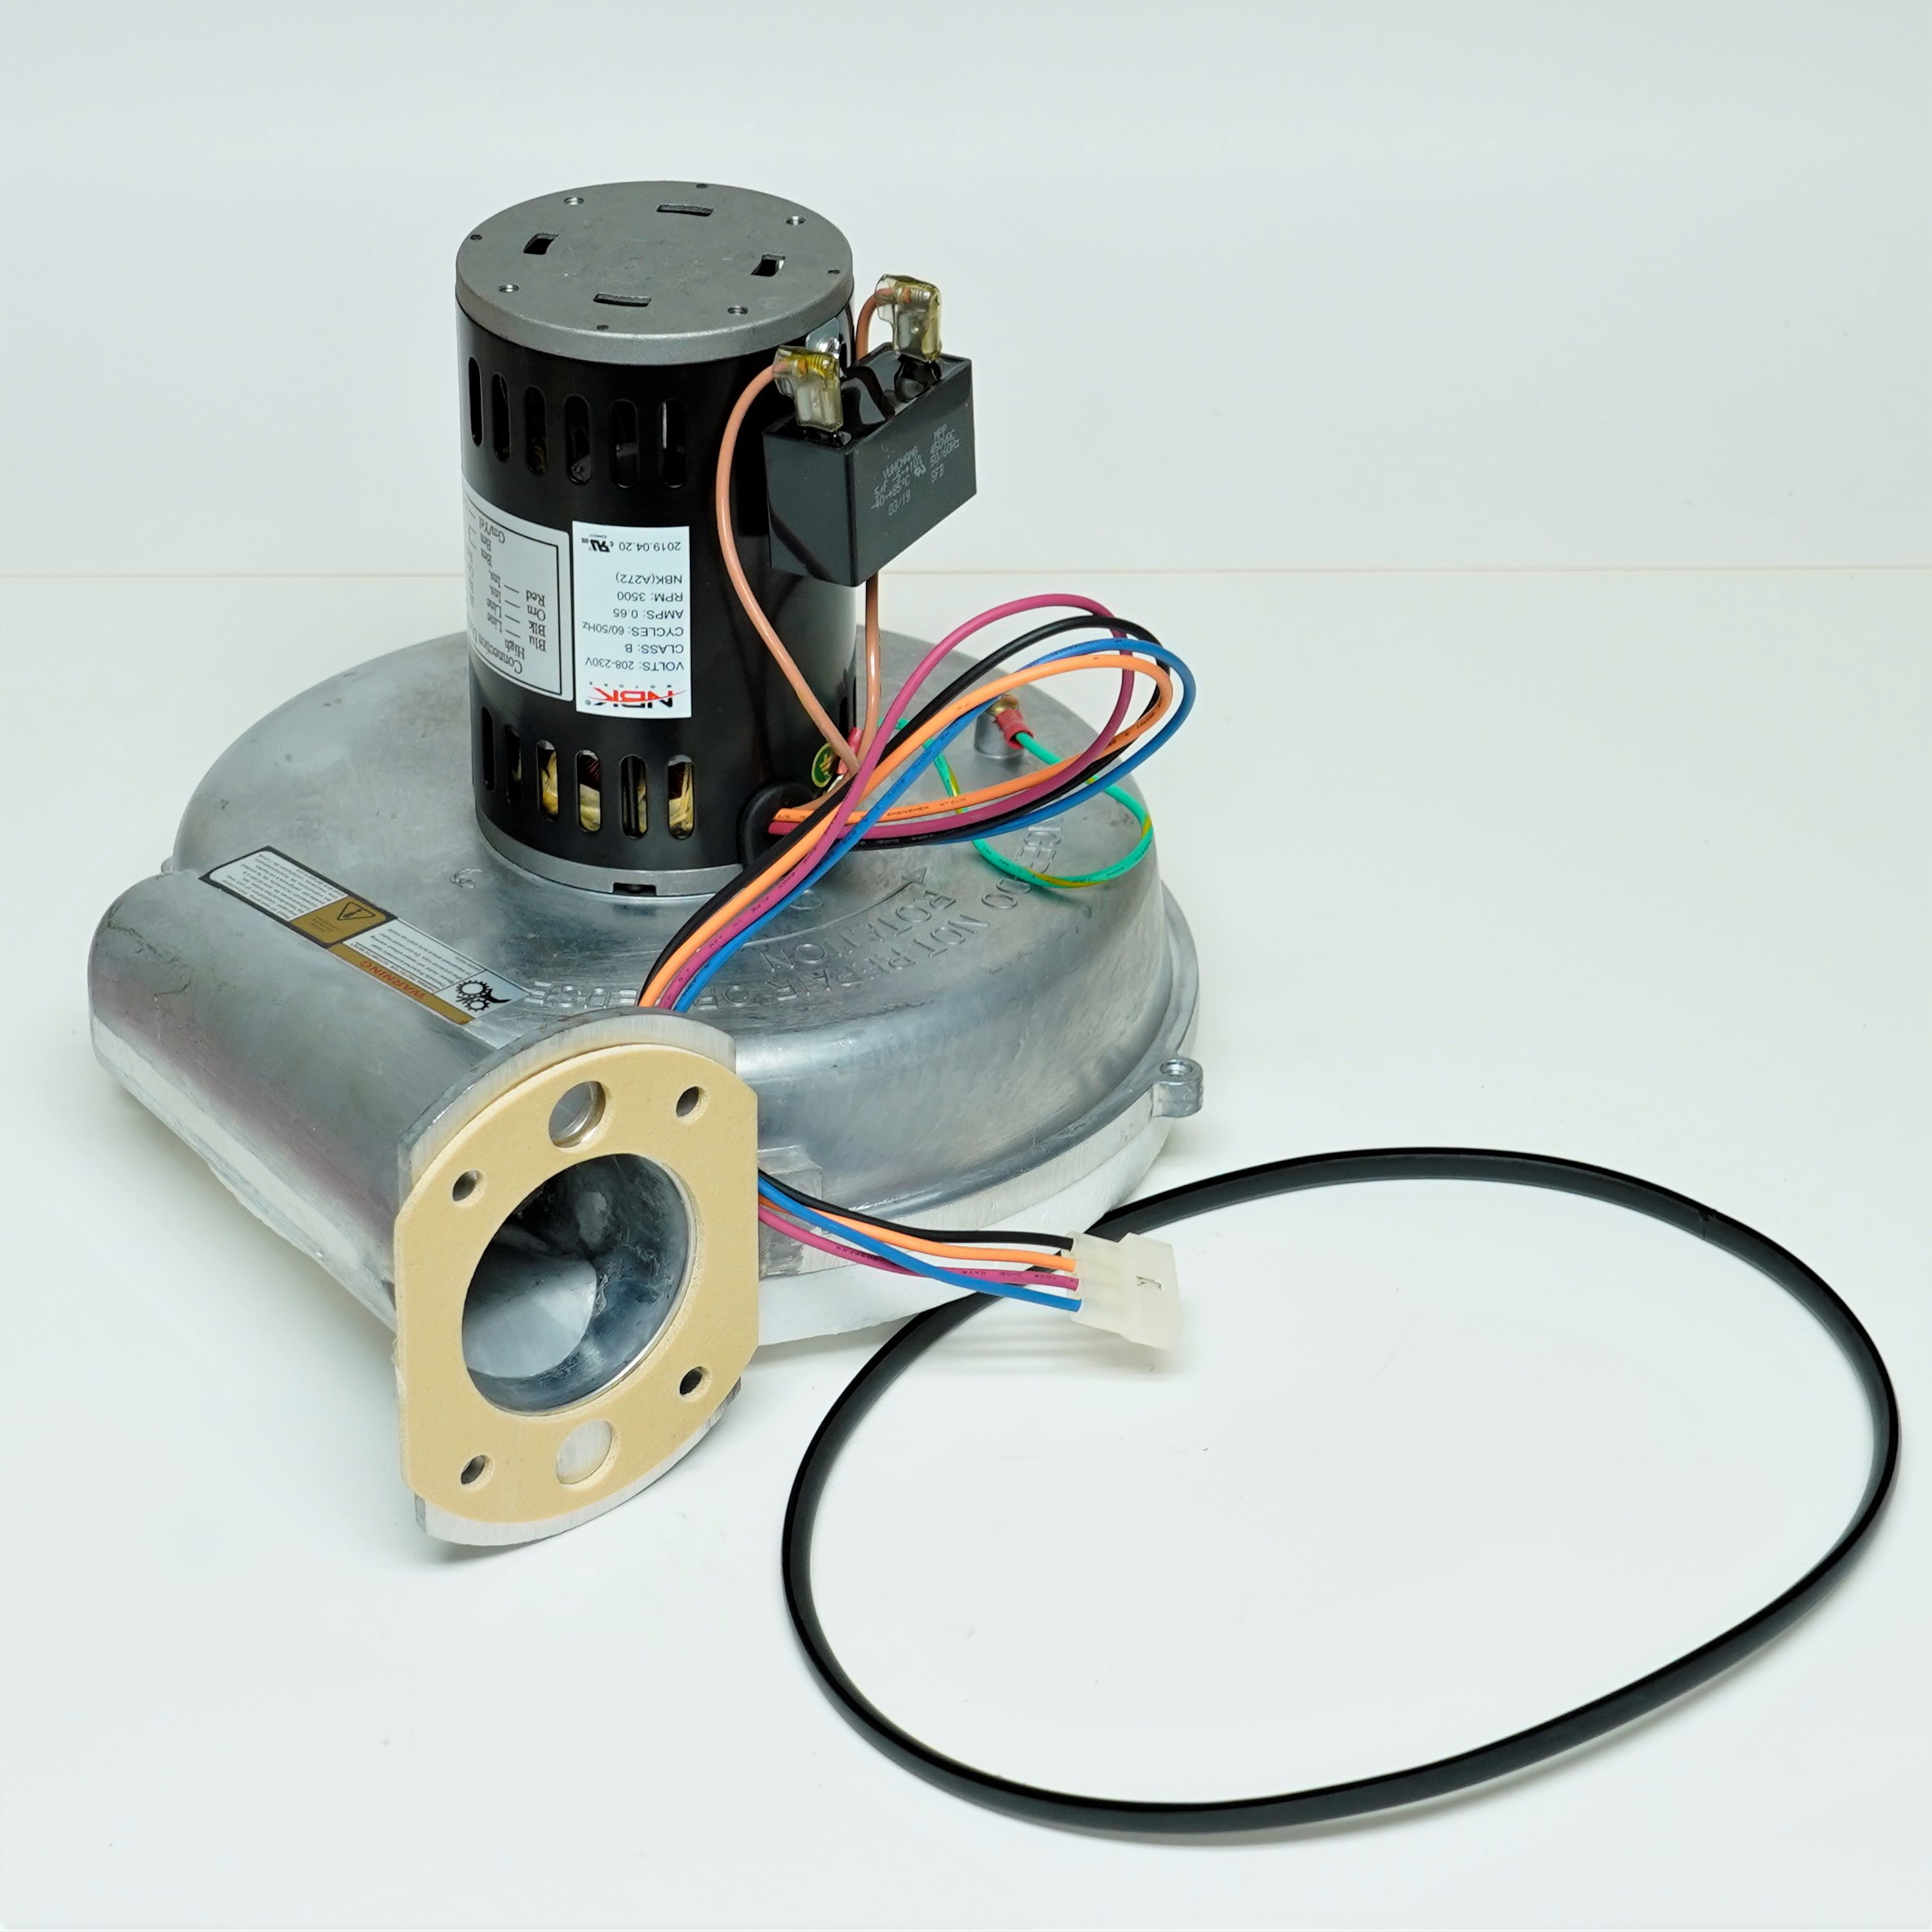 Draft Inducer Motor Replacement For Fasco A272 Trane 38040309 70623971 7062 3971 Ebay 